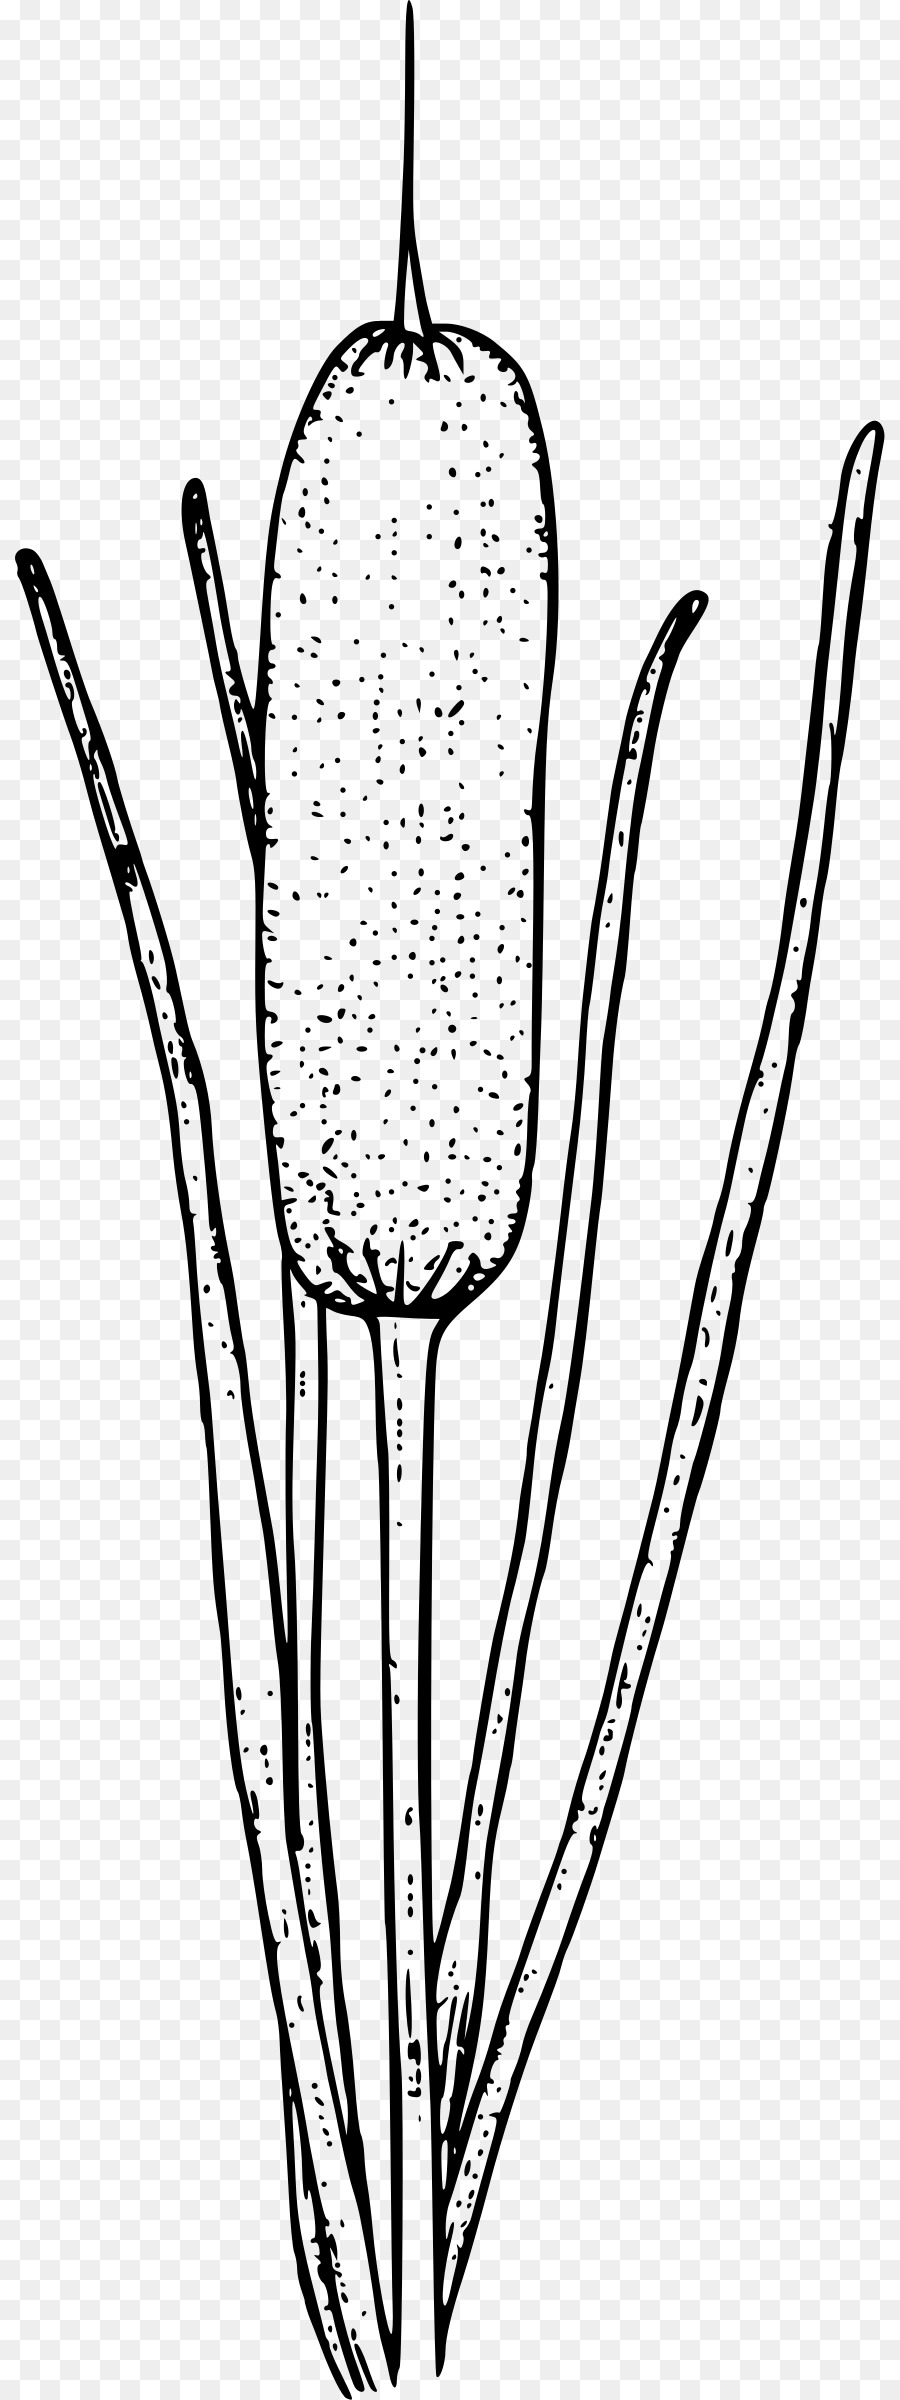 Cattail Clip art Drawing Portable Network Graphics Image - cattail silhouette png cattails clipart png download - 871*2400 - Free Transparent Cattail png Download.